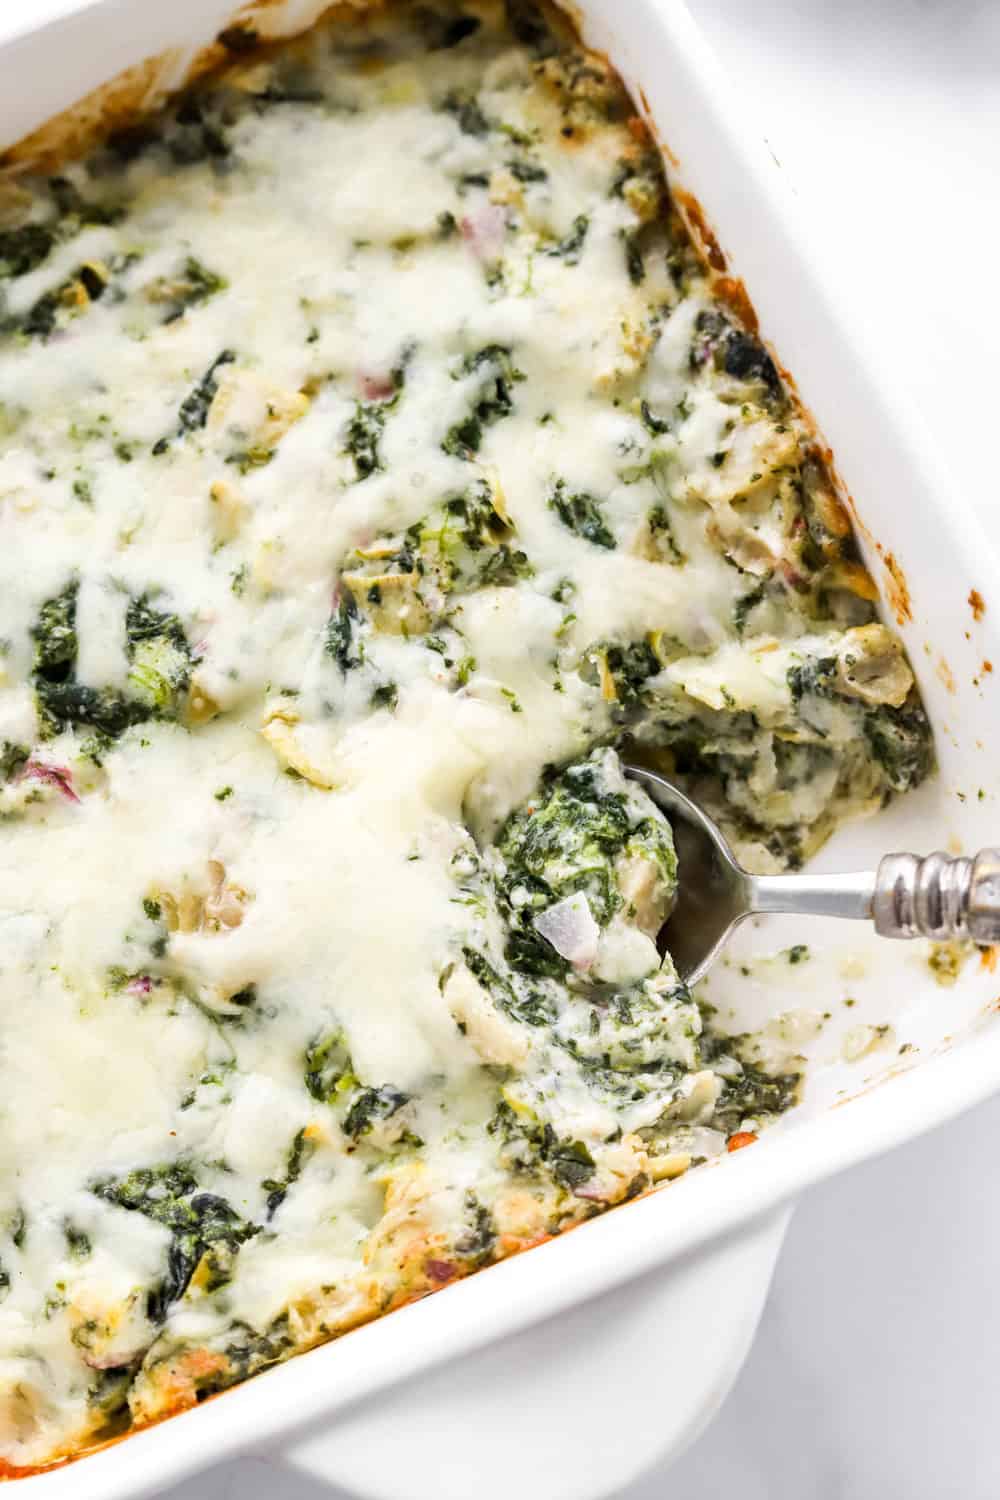 Silver spoon scooping cheesy greens out of a baking dish finked with cheesy, green dip